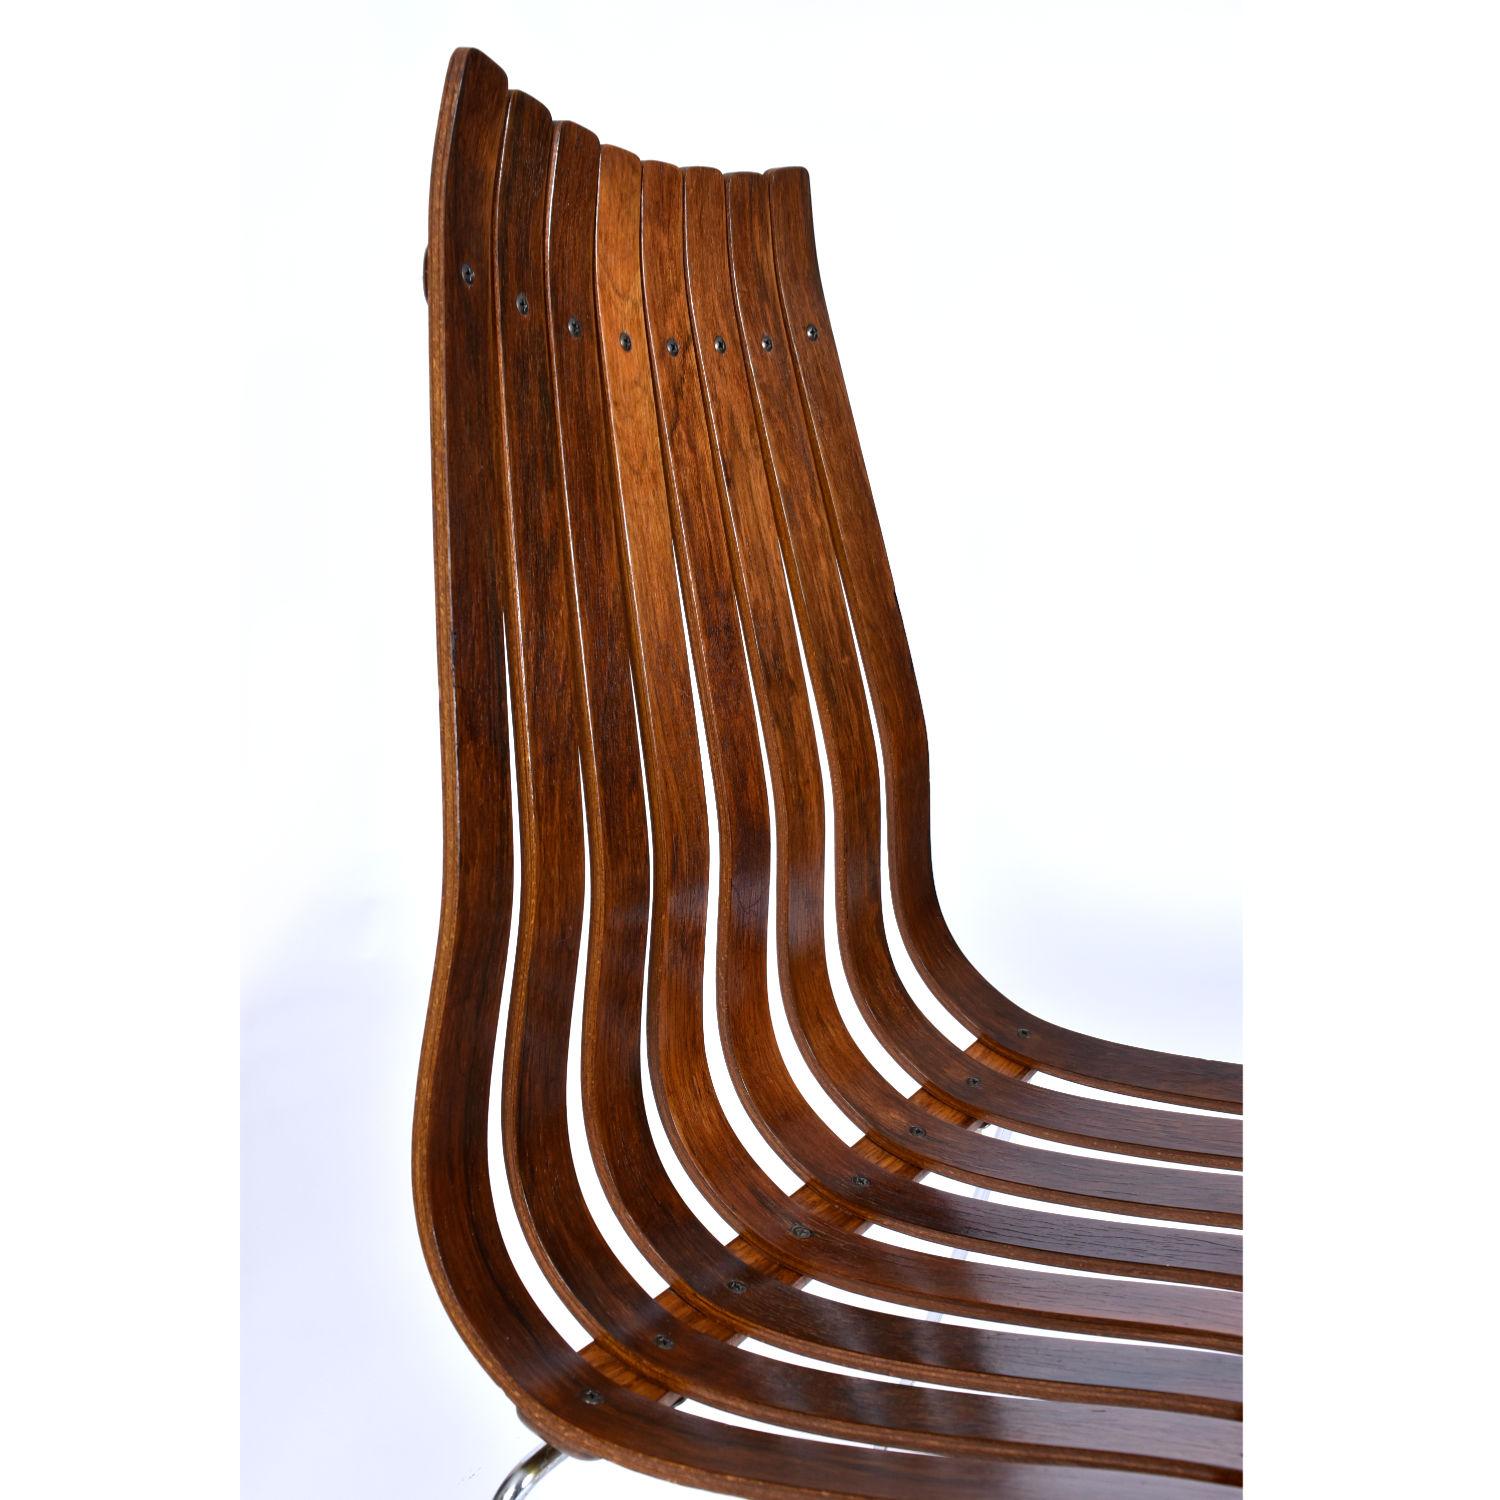 Metal Hans Brattrud Rosewood Scandia Dining Chairs by Hove Mobler of Norway